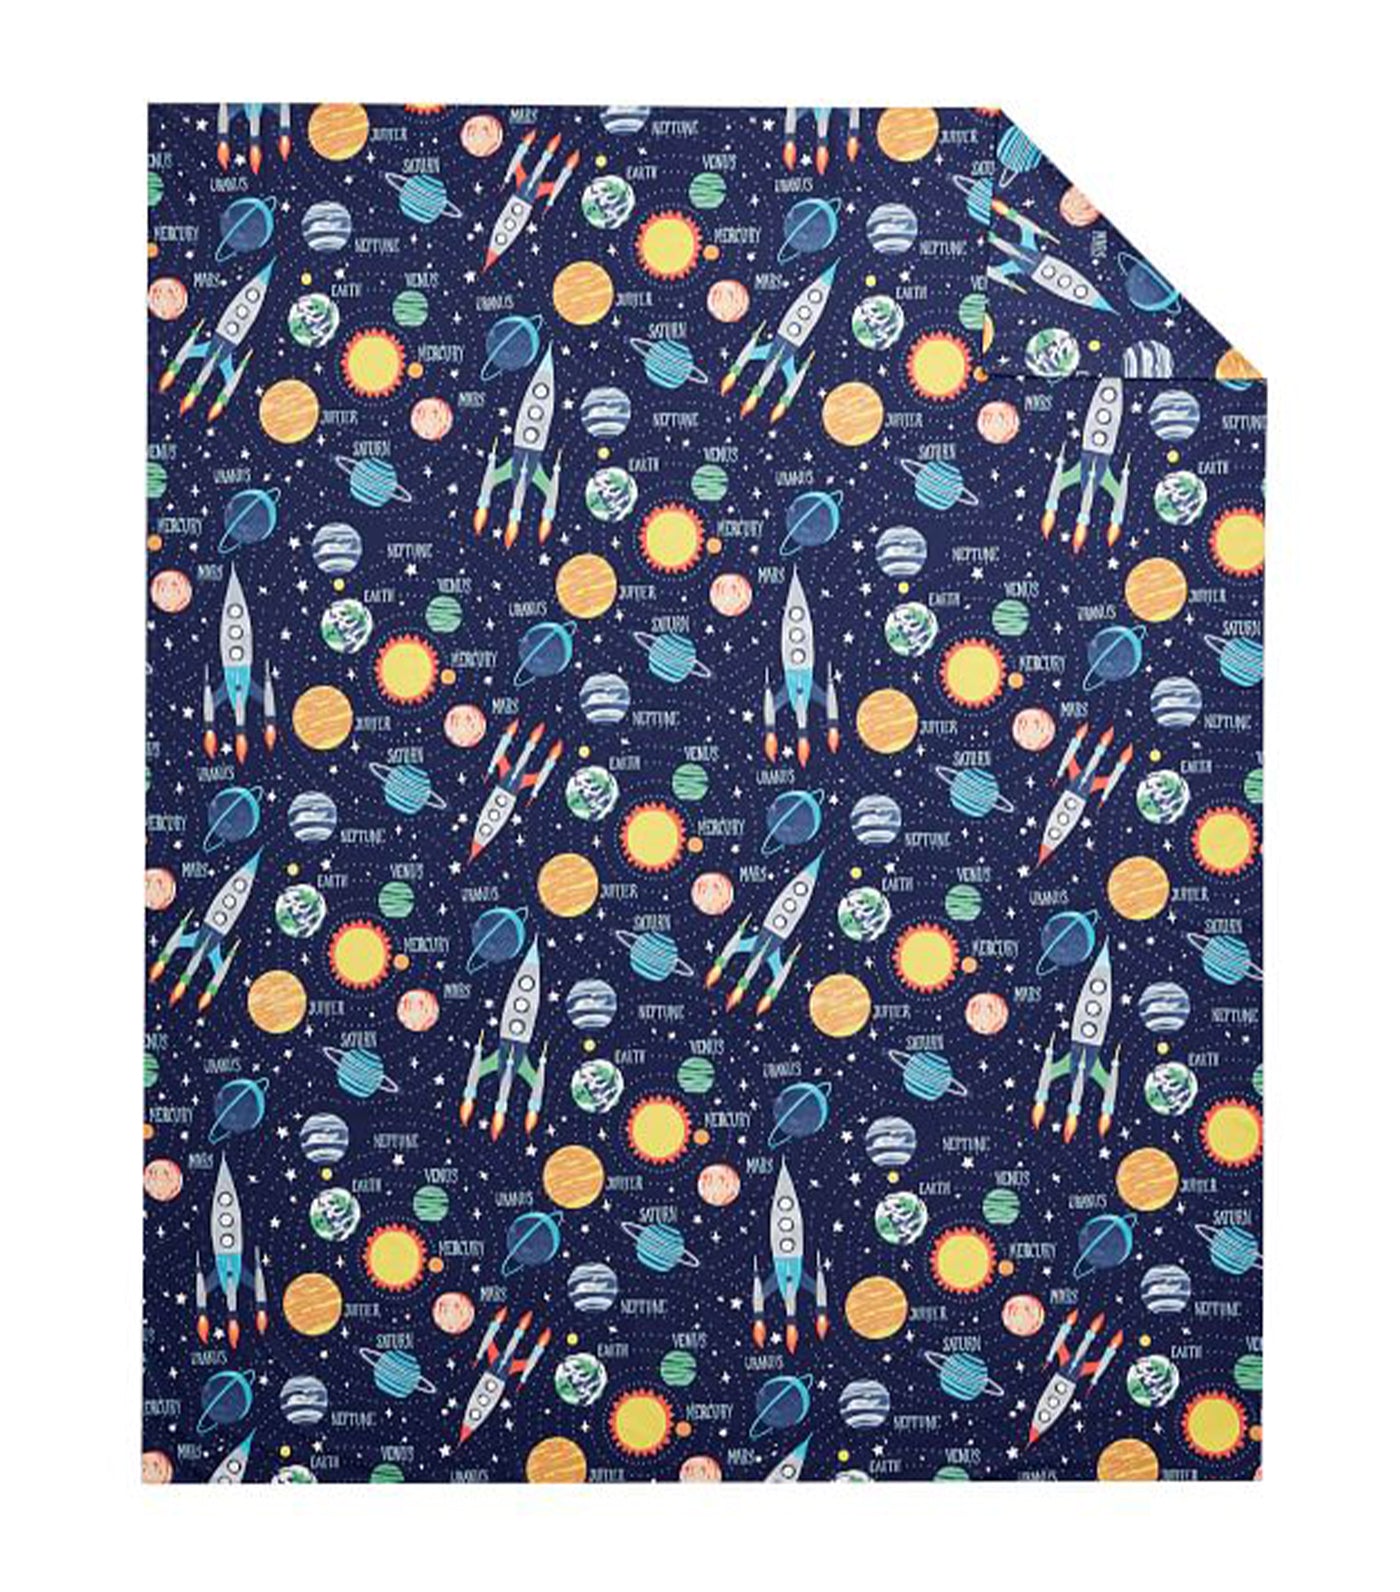 pottery barn kids solar system glow-in-the-dark duvet cover - twin